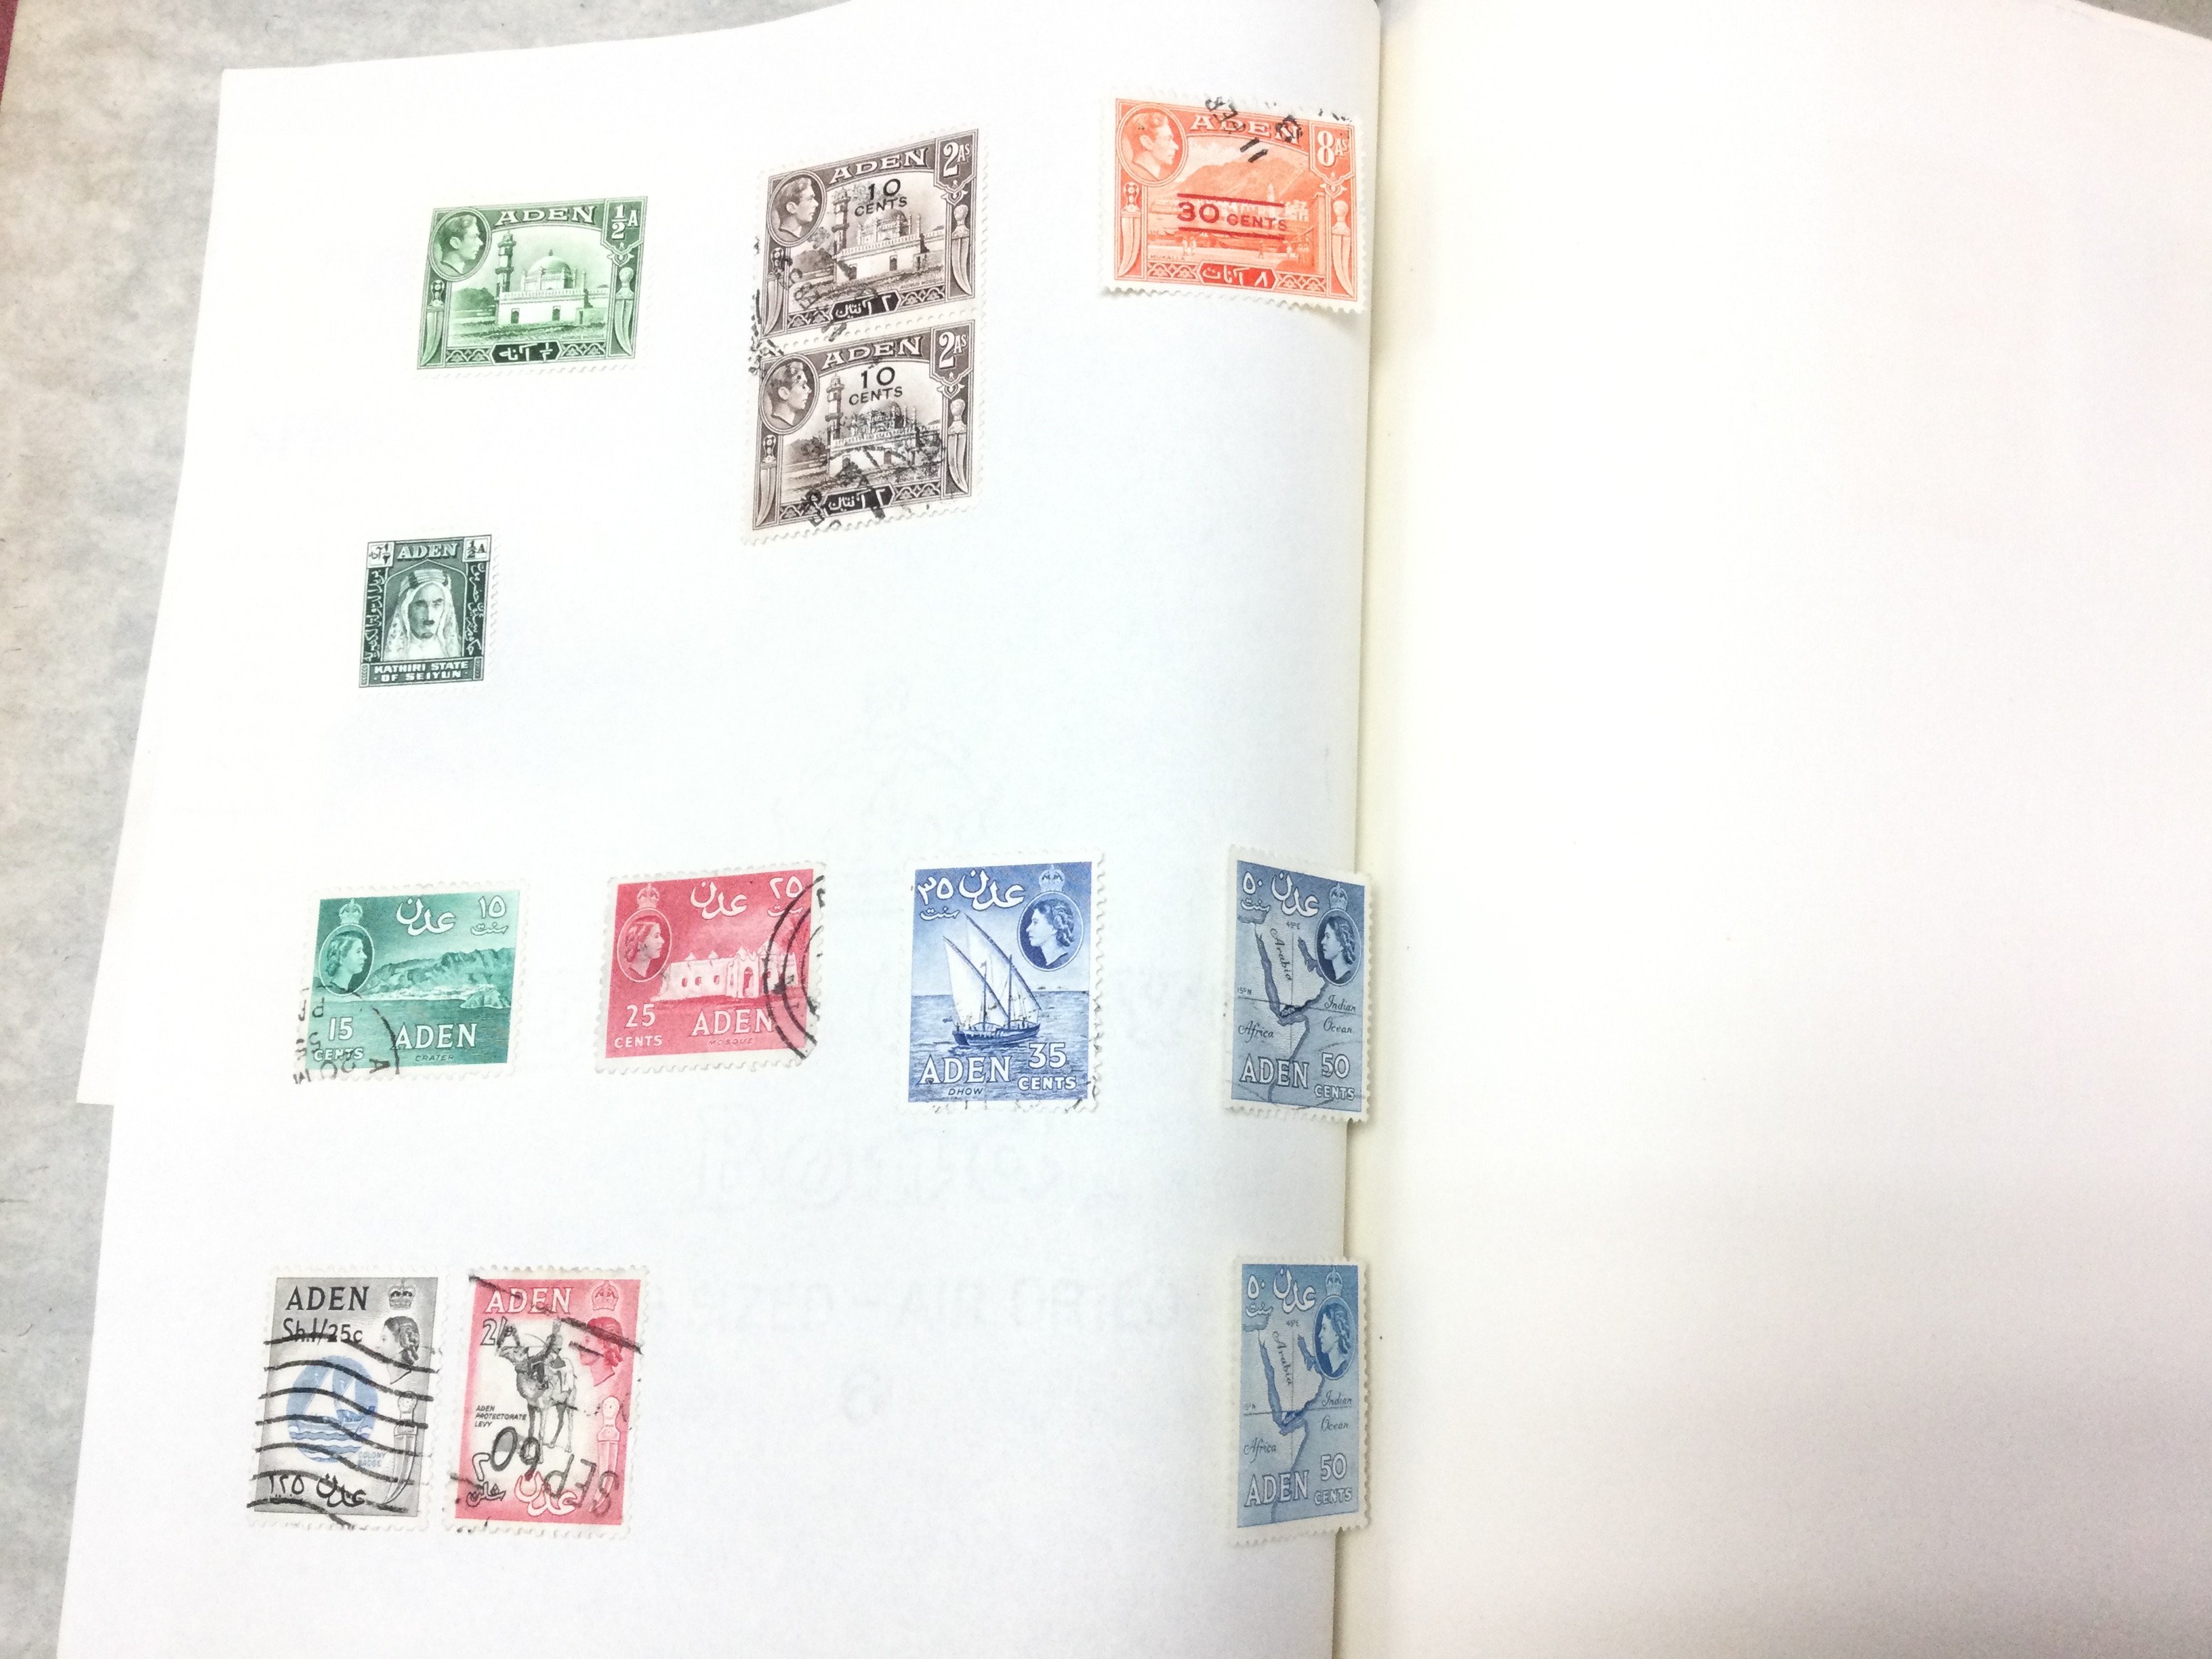 A British & Commonwealth stamp album, postage cate - Image 2 of 10